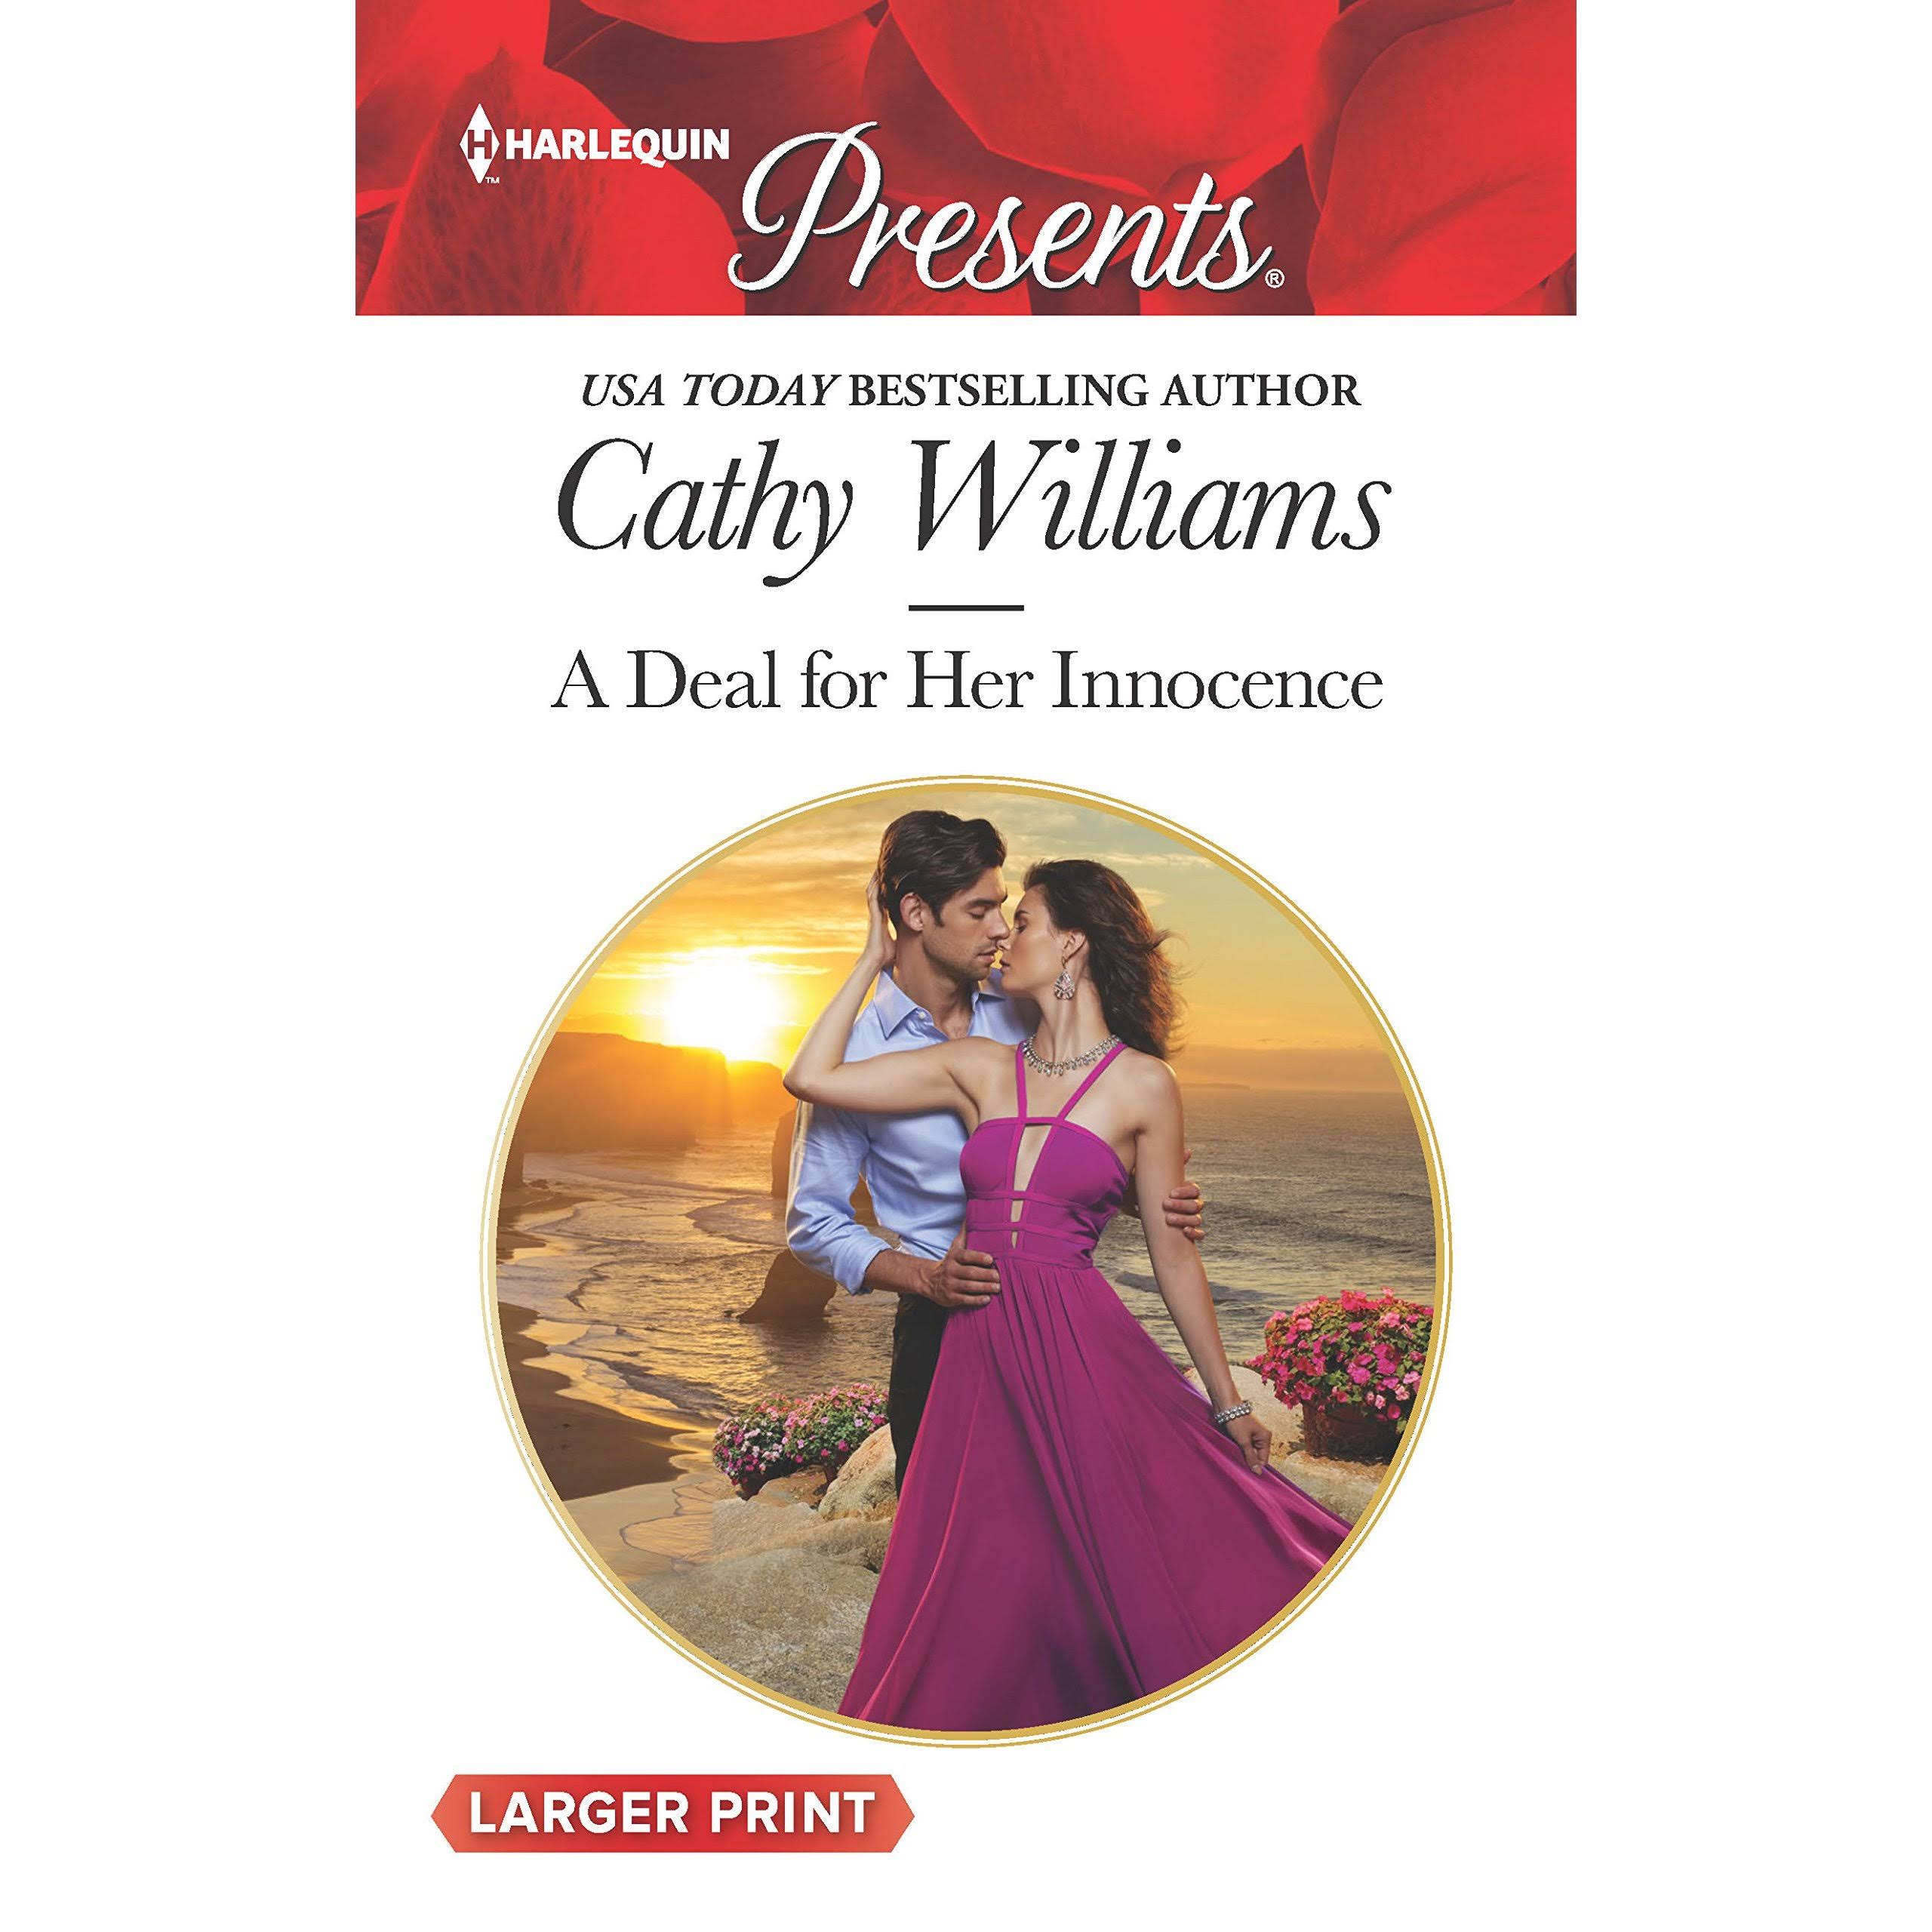 A Deal for Her Innocence [Book]